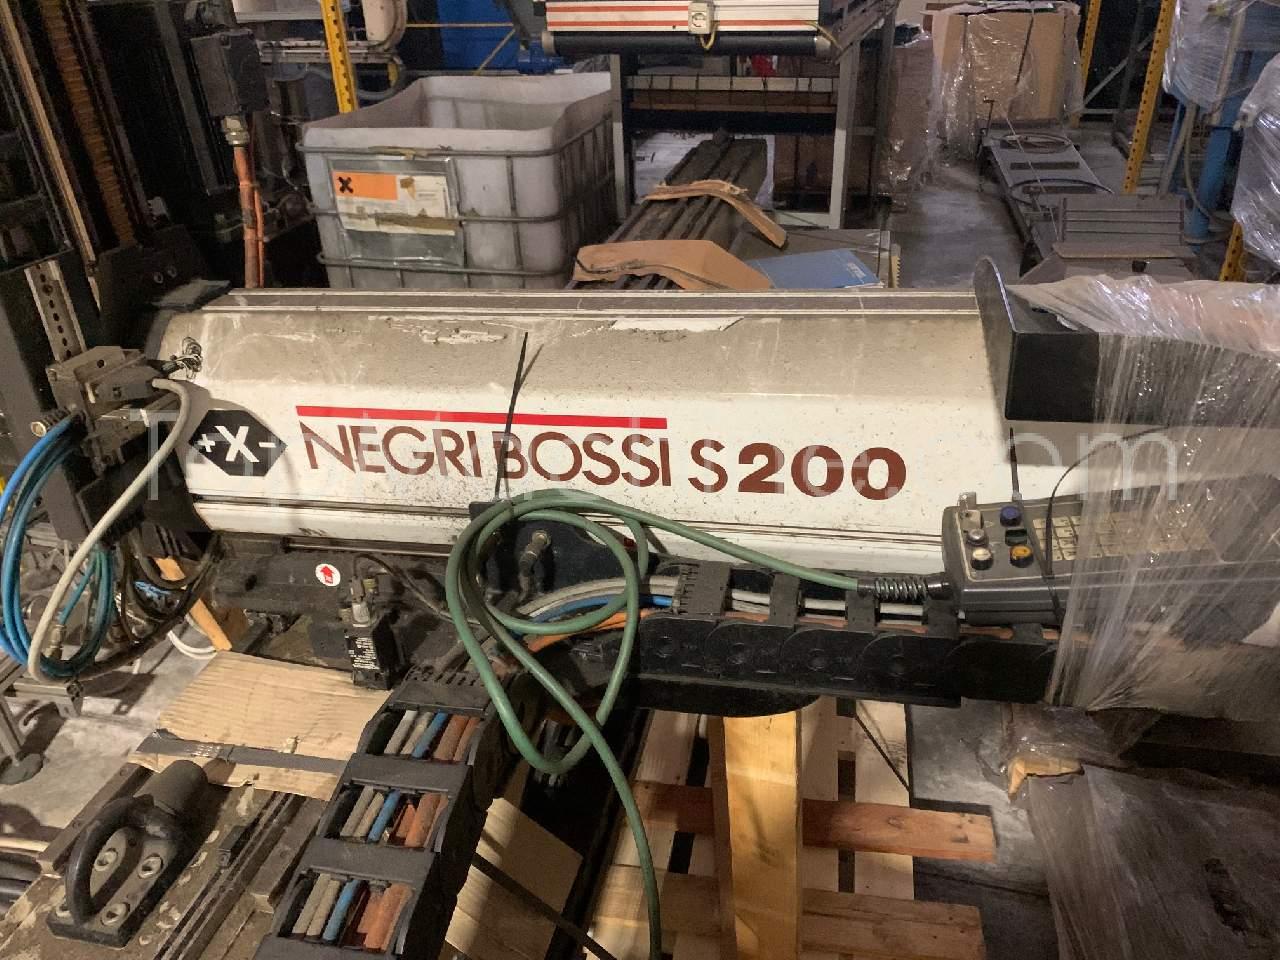 Used Negri Bossi V370 Injection Moulding Clamping force up to 1000 T